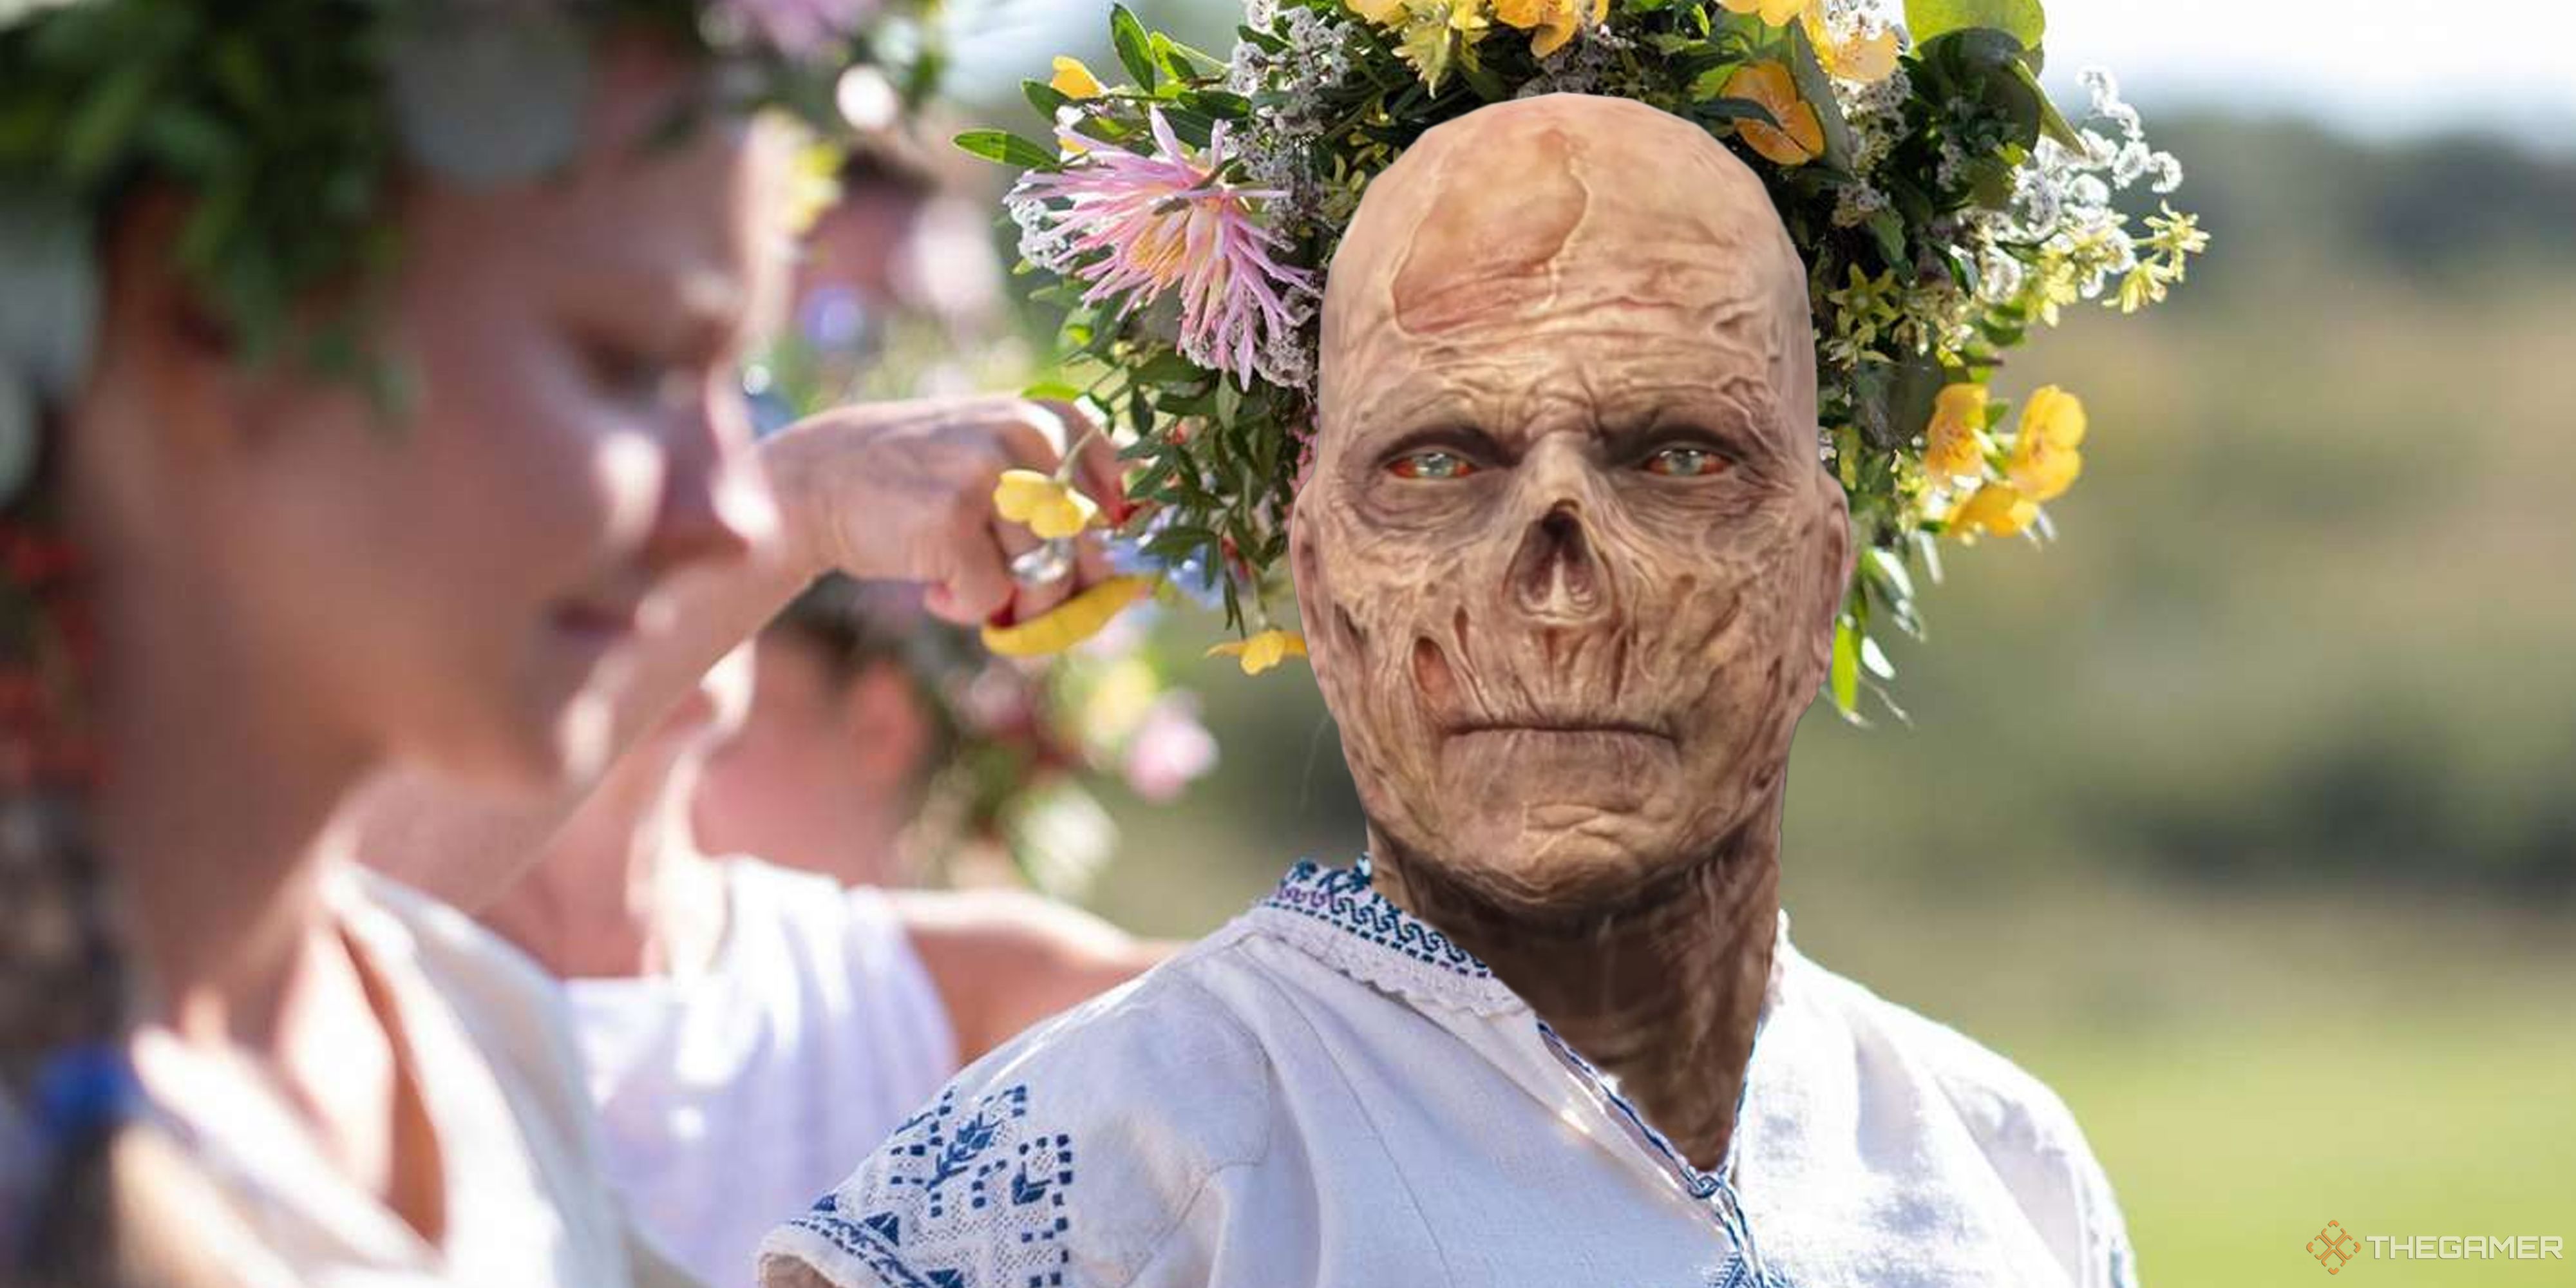 Fallout 4 ghoul in Midsommar movie